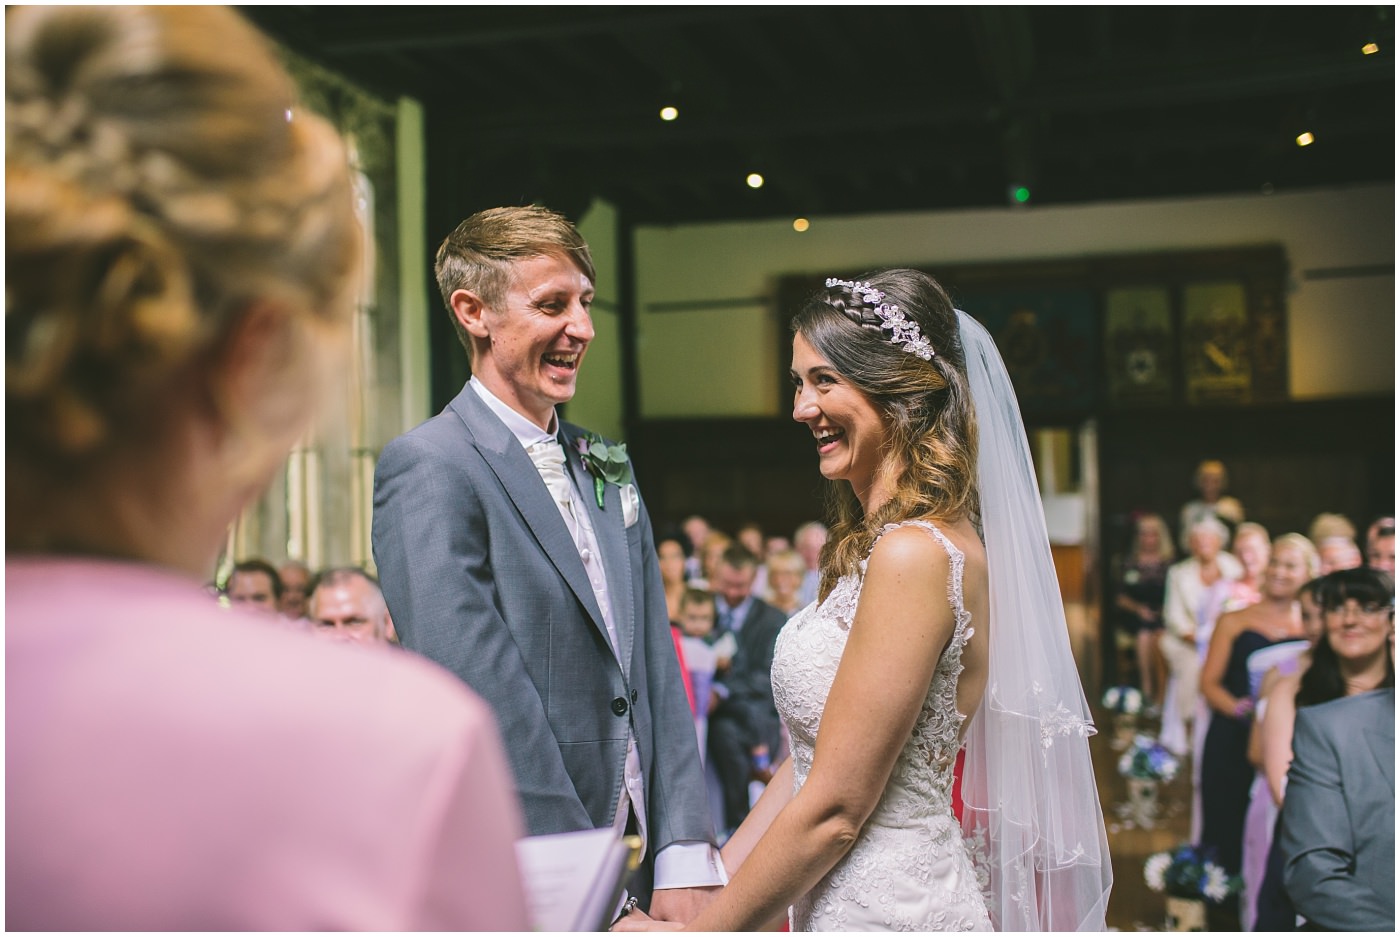 Happy couple are all smiles in their wedding ceremony